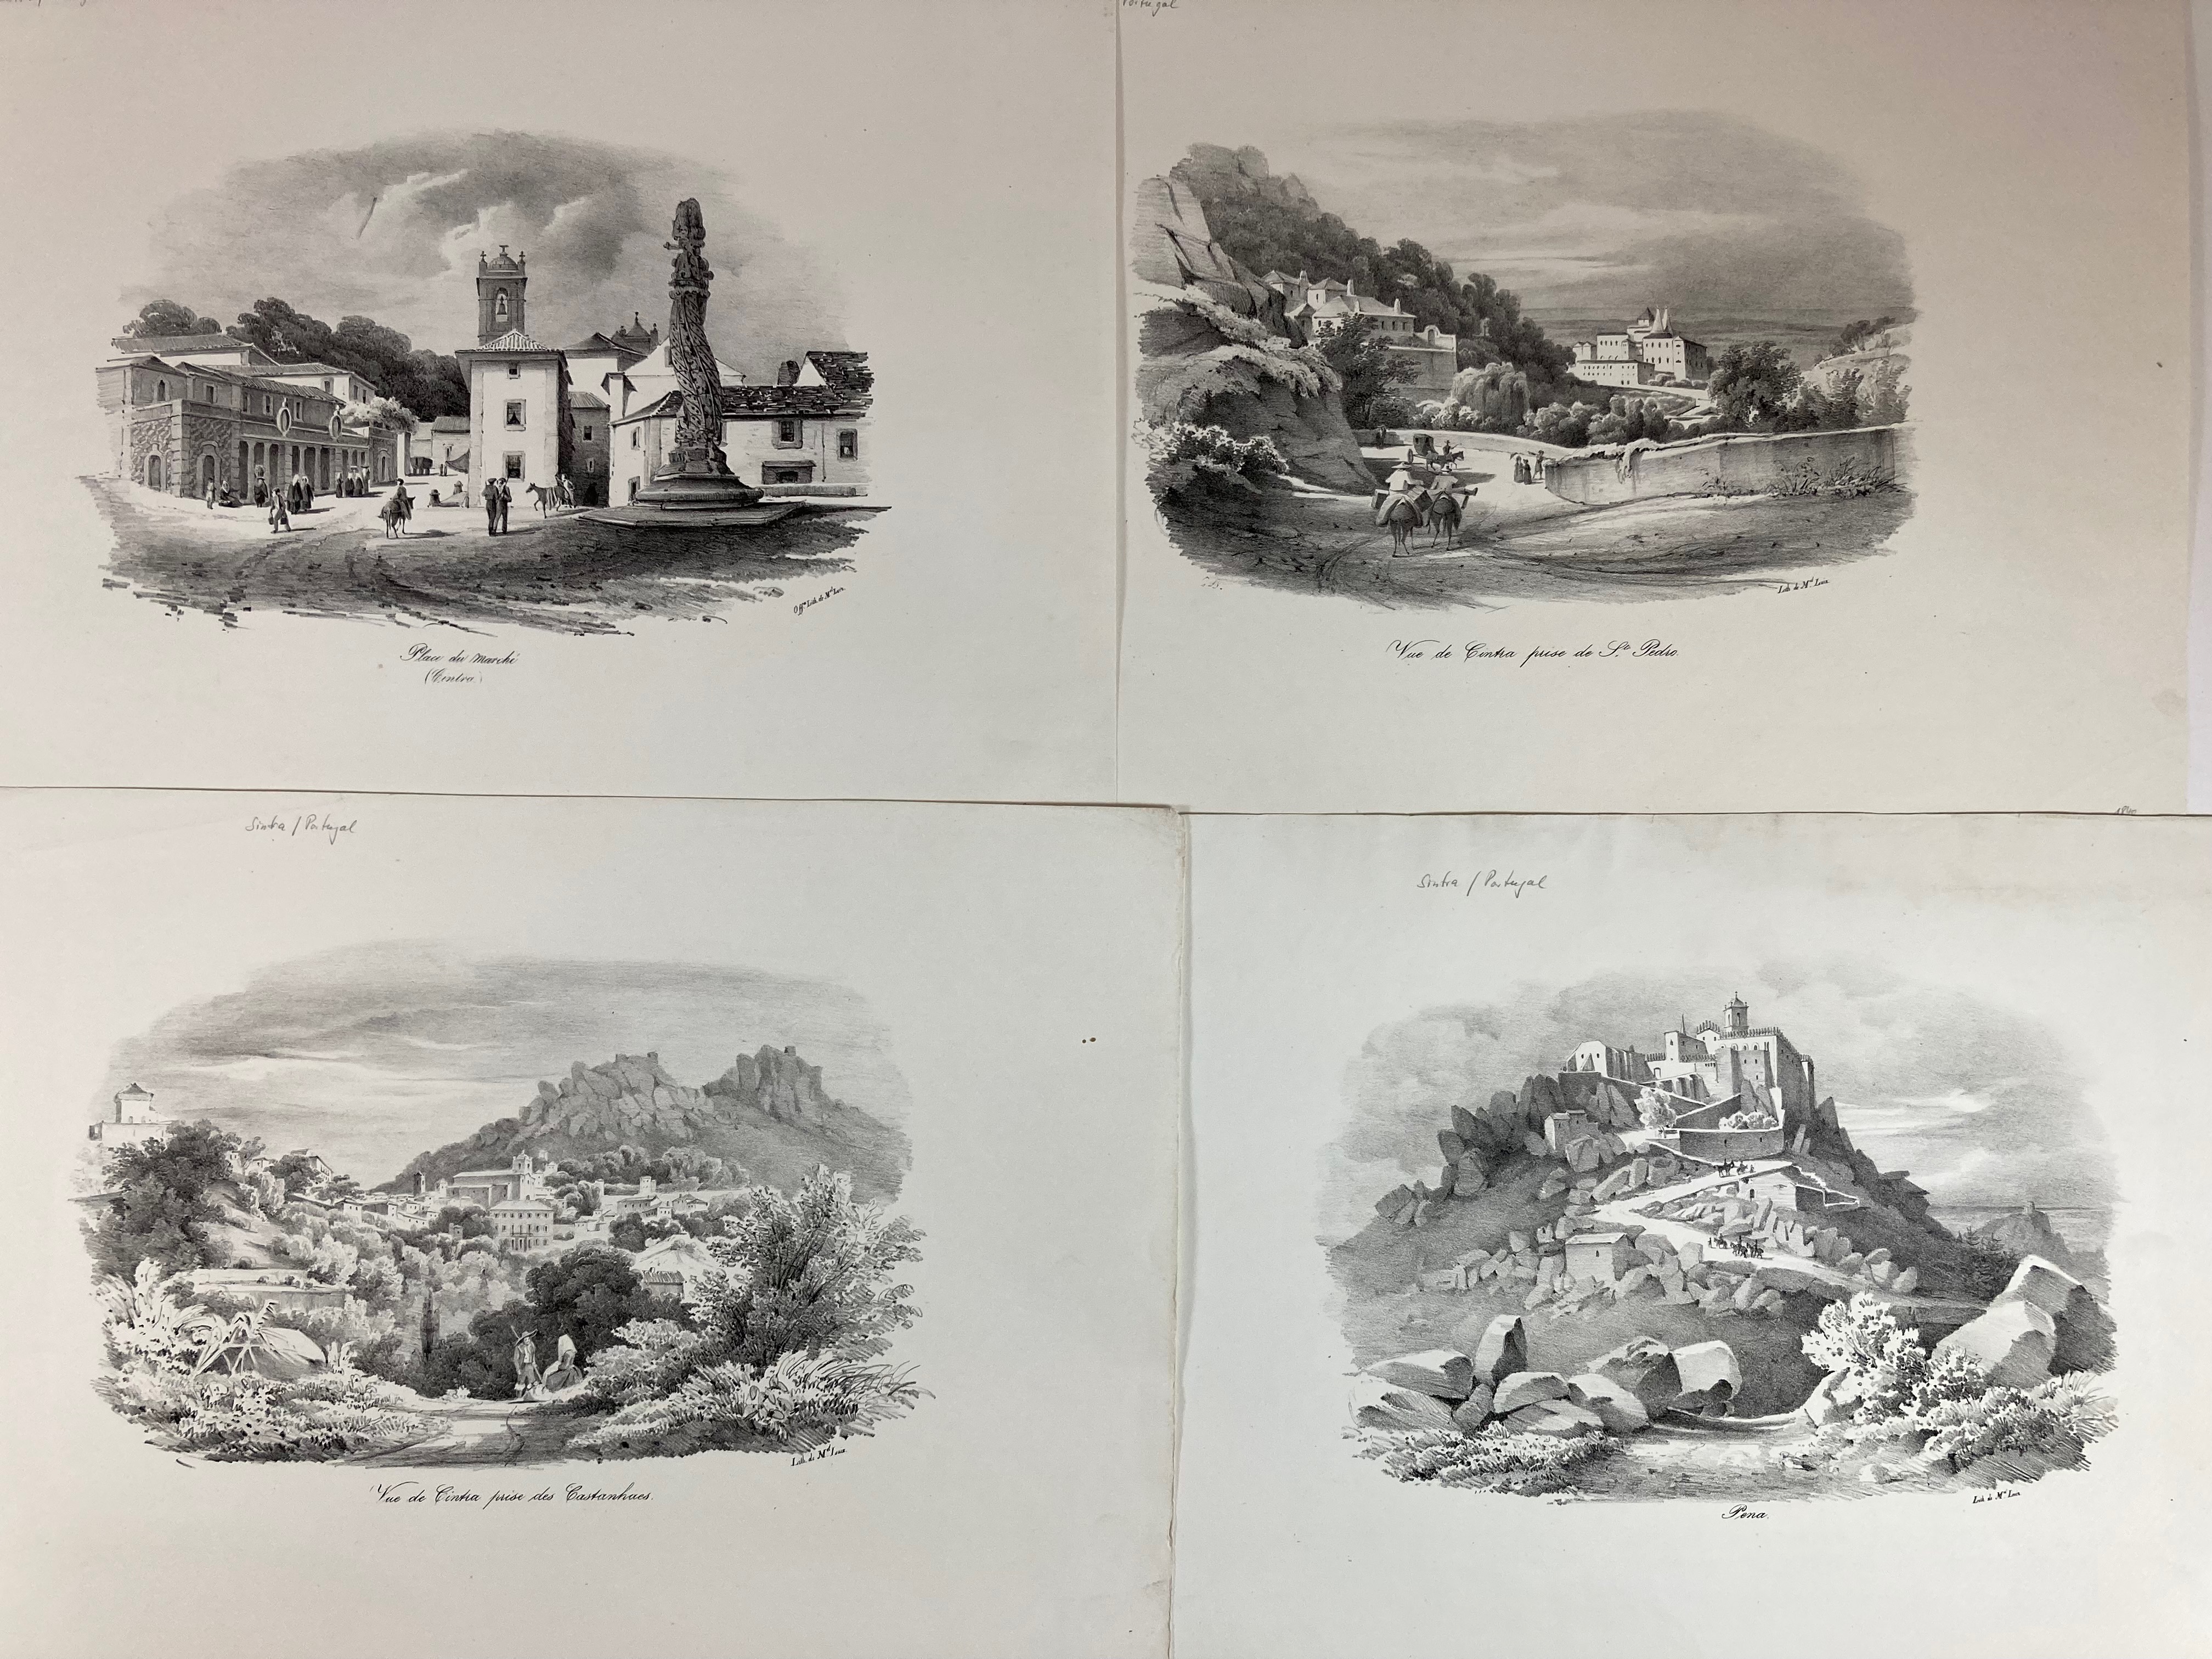 PORTUGAL -- BRELAZ, Cementine de (1811-1892). Collection of 5 plain lithographed views of